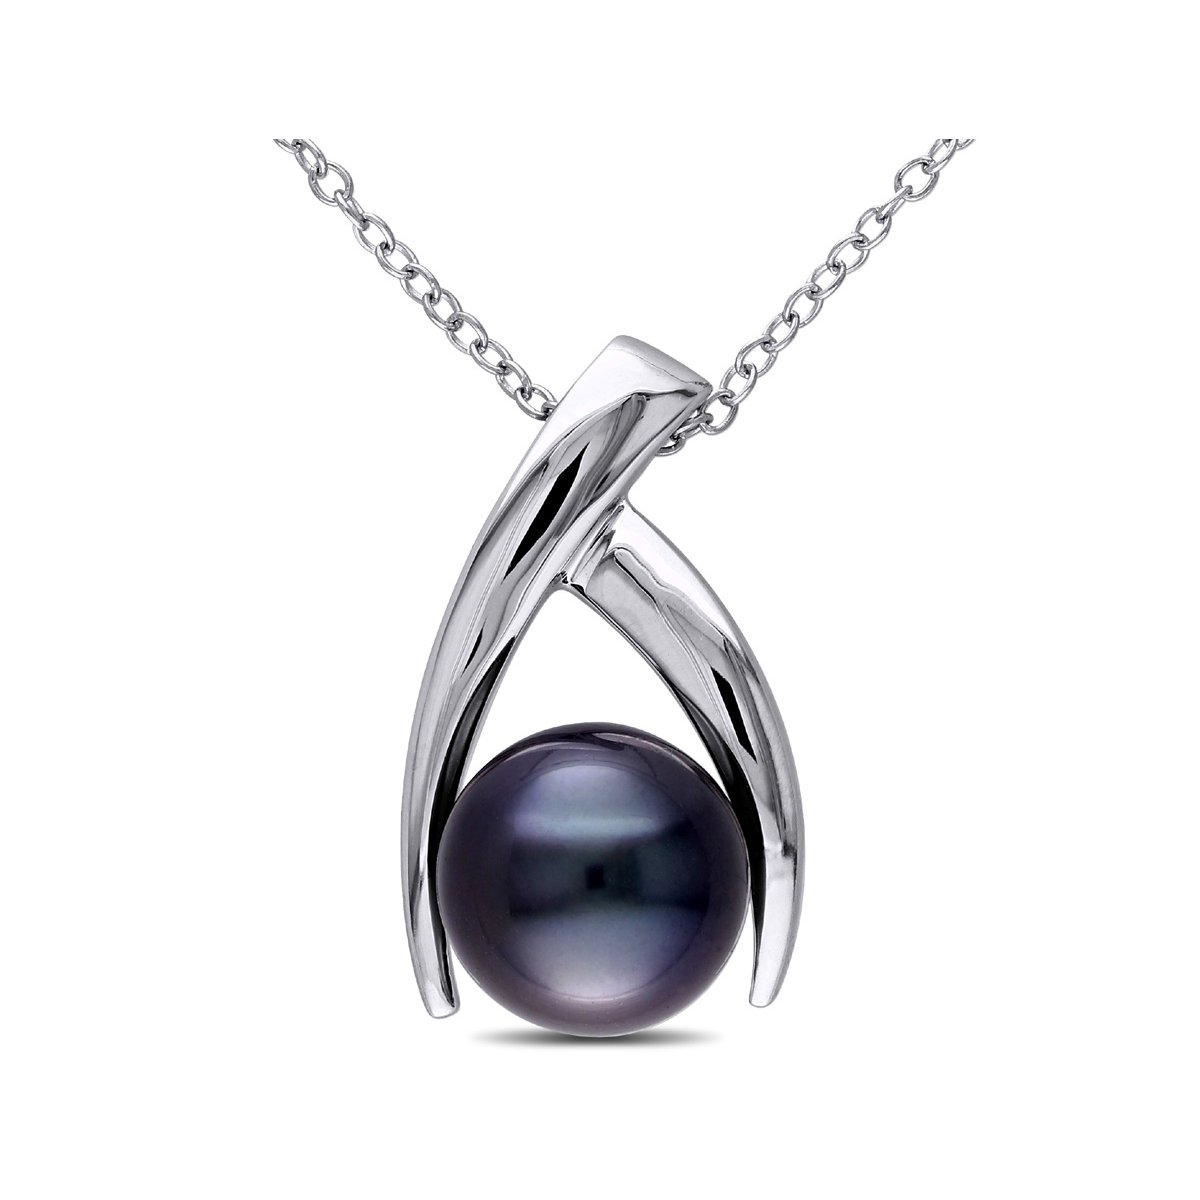 Gem And Harmony 9-10mm Black Tahitian Cultured Pearl Pendant Necklace with Sterling Silver ChainSilver